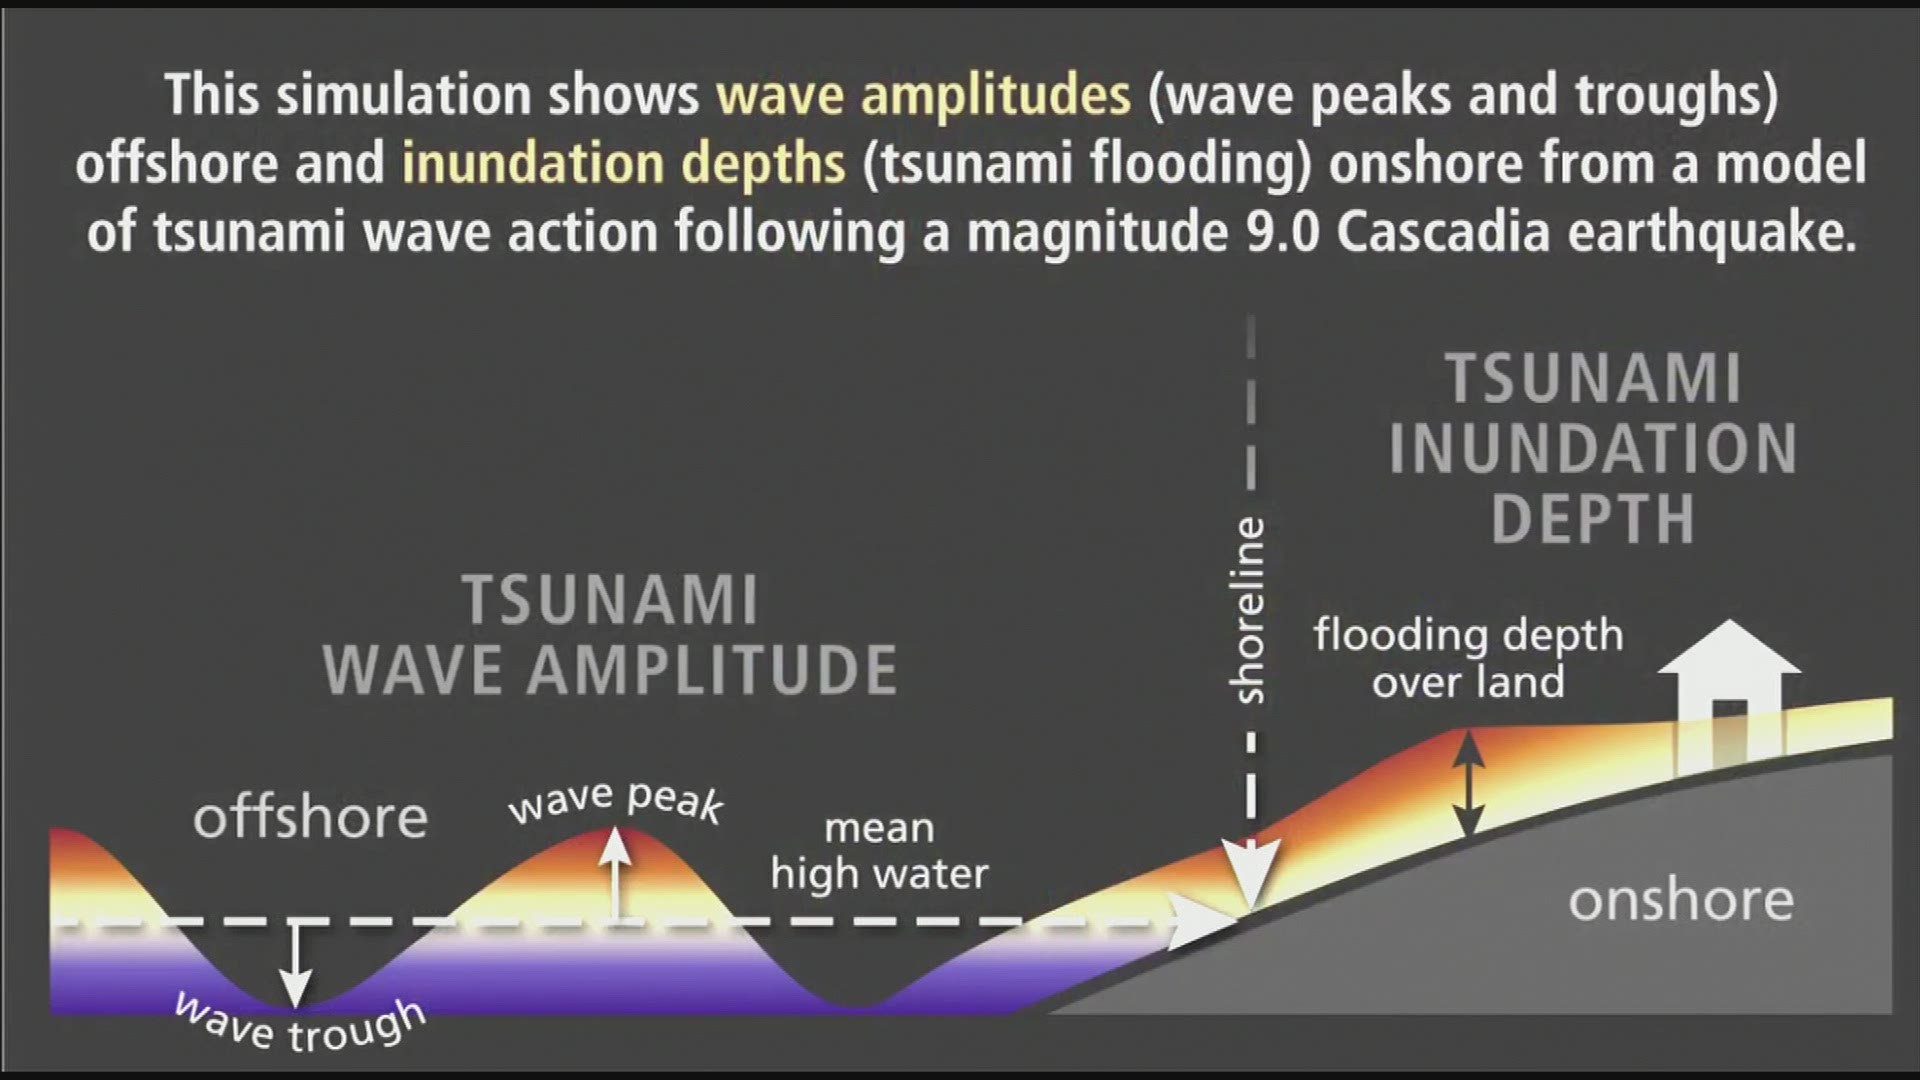 Washington State Department of Natural Resources tsunami simulations show the impact of a Cascadia Subduction Zone earthquake on Grays Harbor and Willapa Bay.